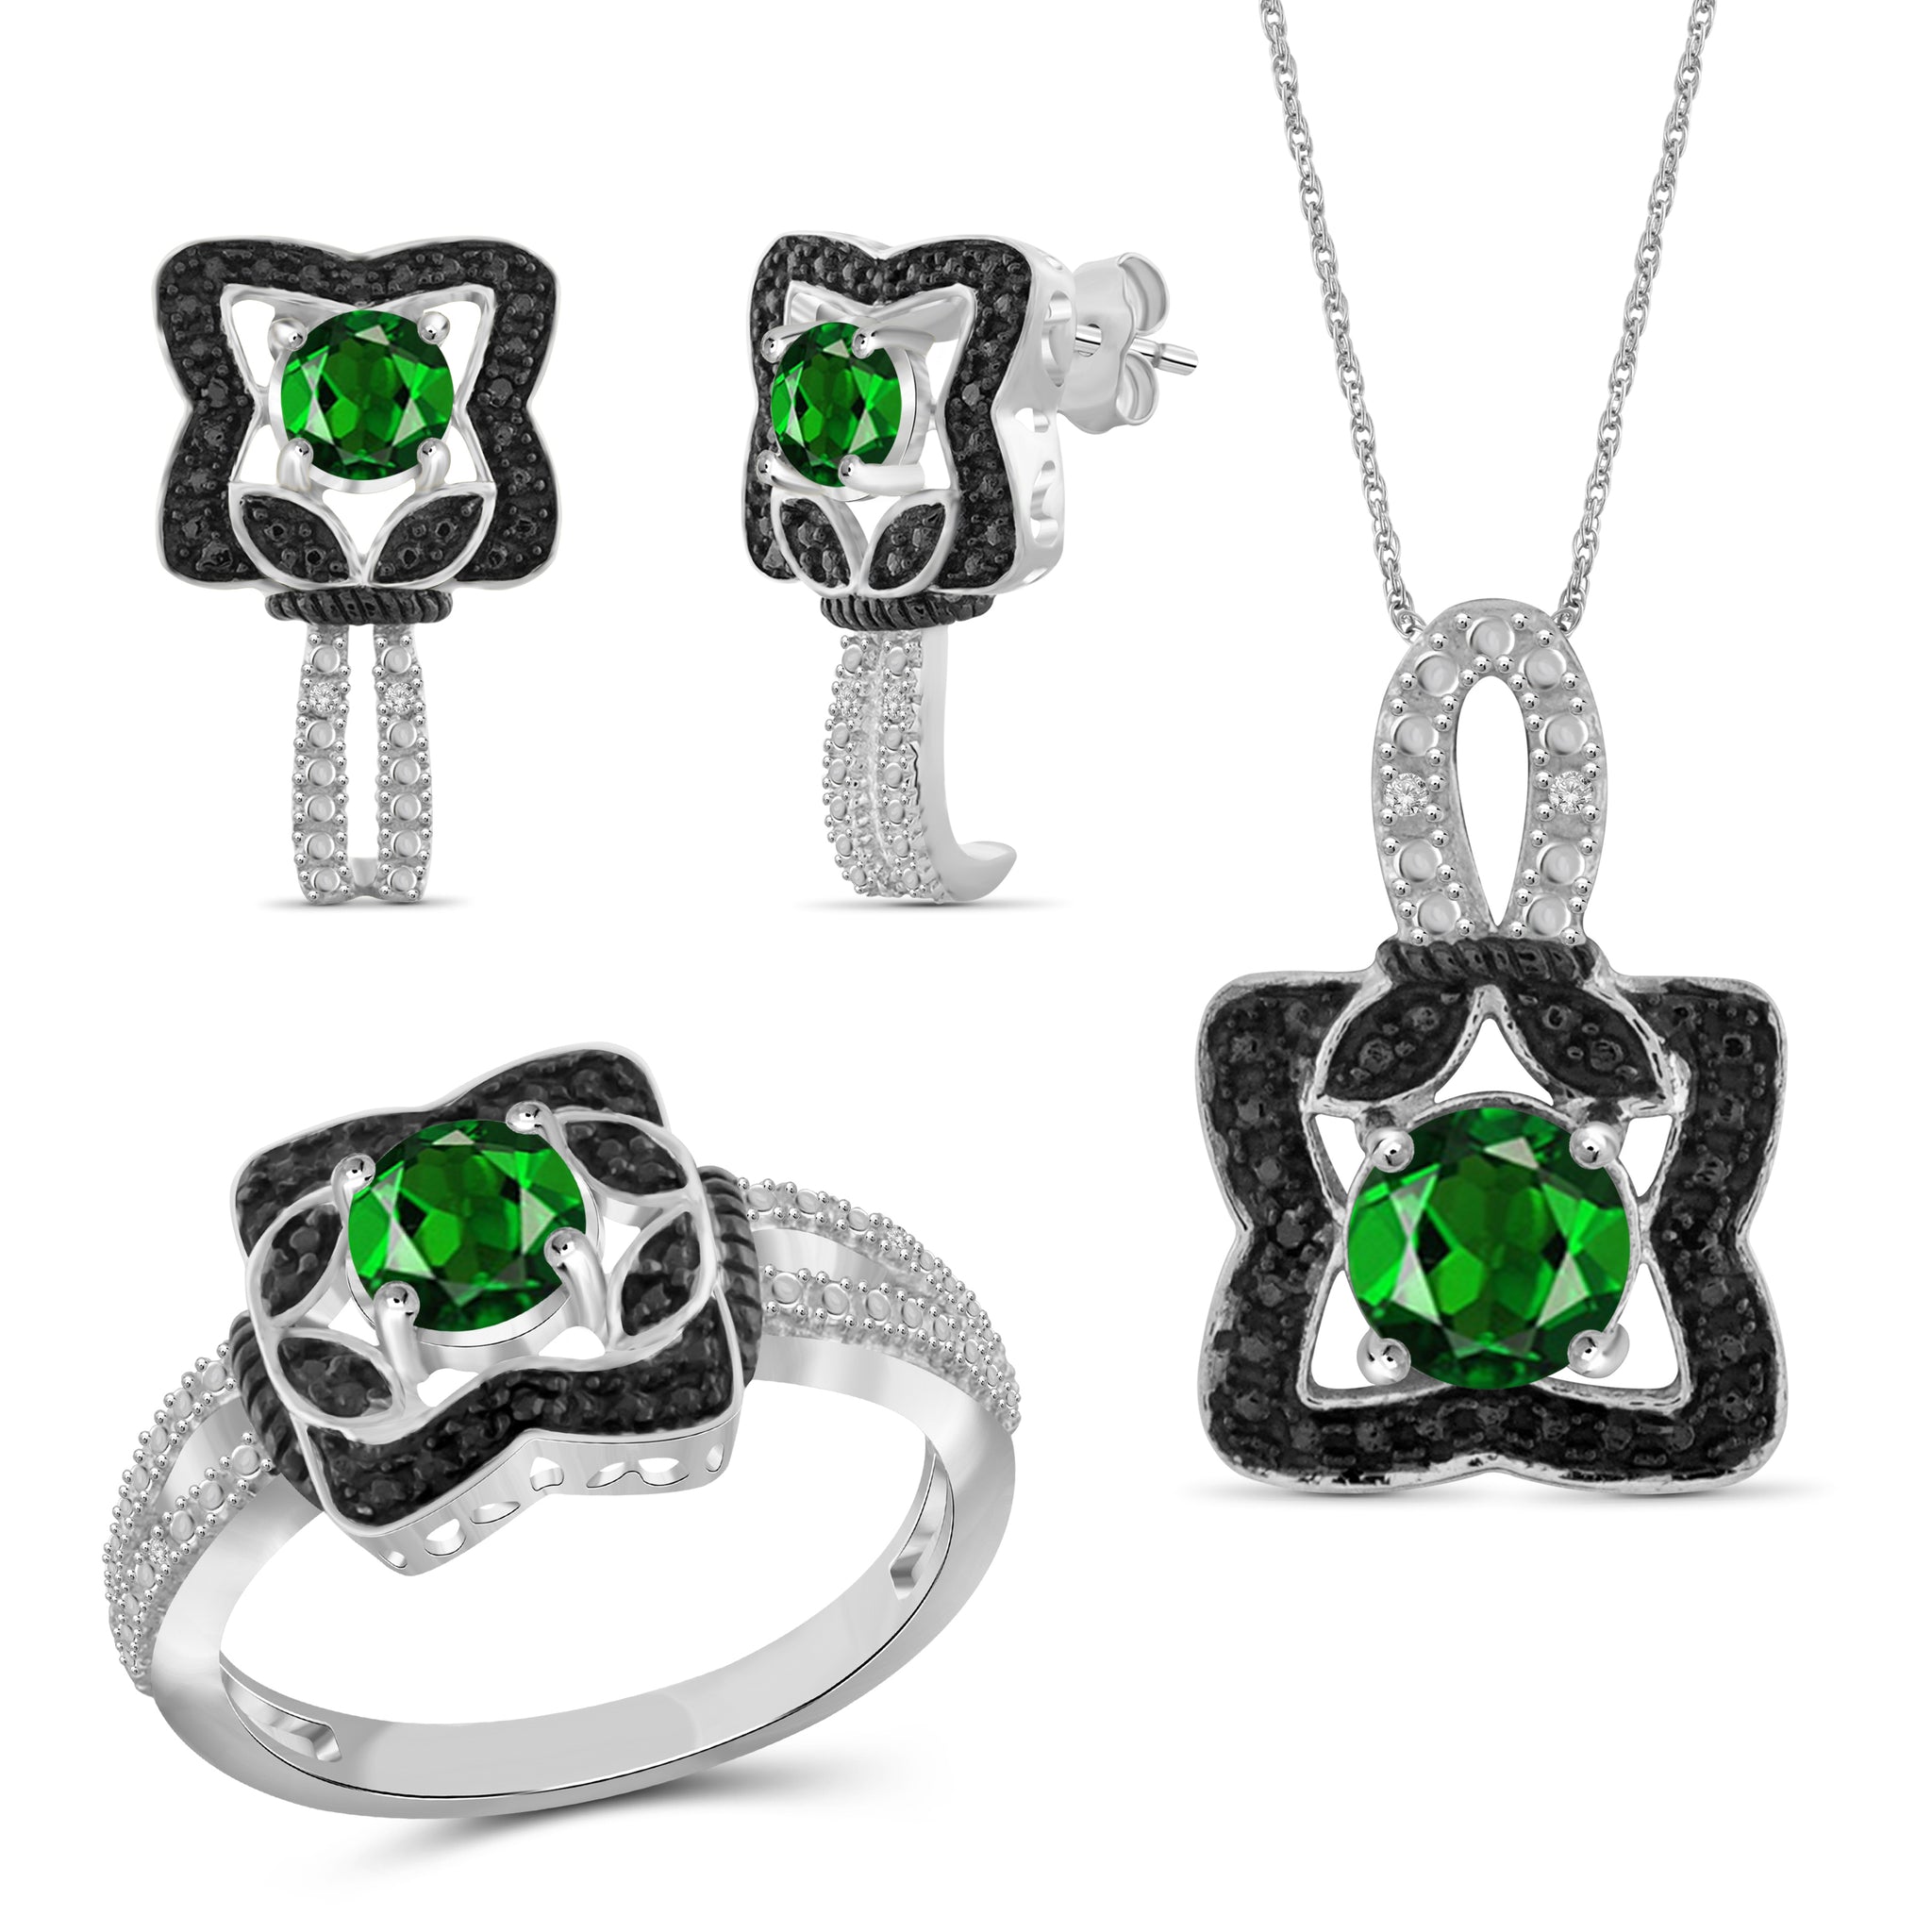 JewelonFire 2.10 Carat T.G.W. Chrome Diopside And  1/20 Carat T.W. Black & White Diamond Sterling Silver 3 Piece Jewelry Set - Assorted Colors